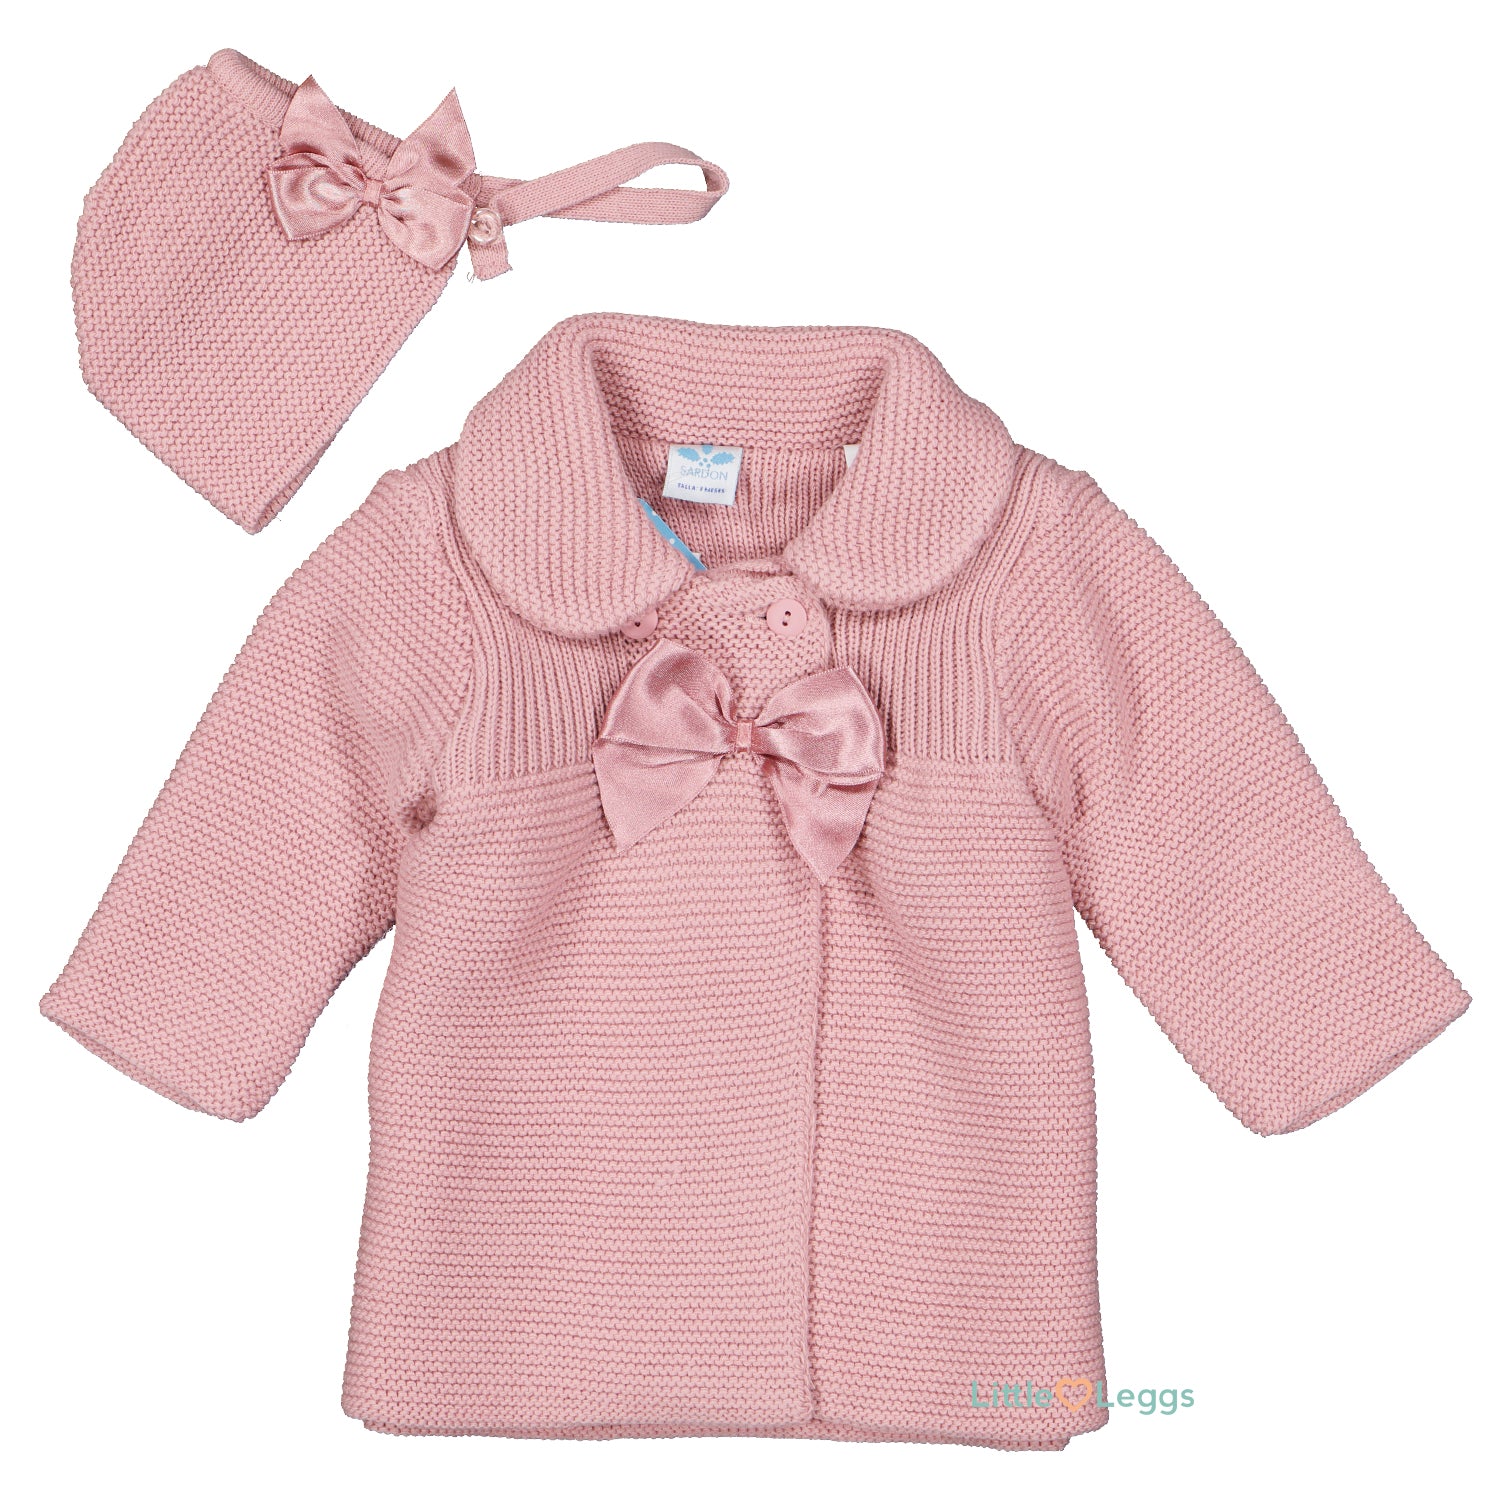 Dusty Pink Knitted Coat and Bonnet Set